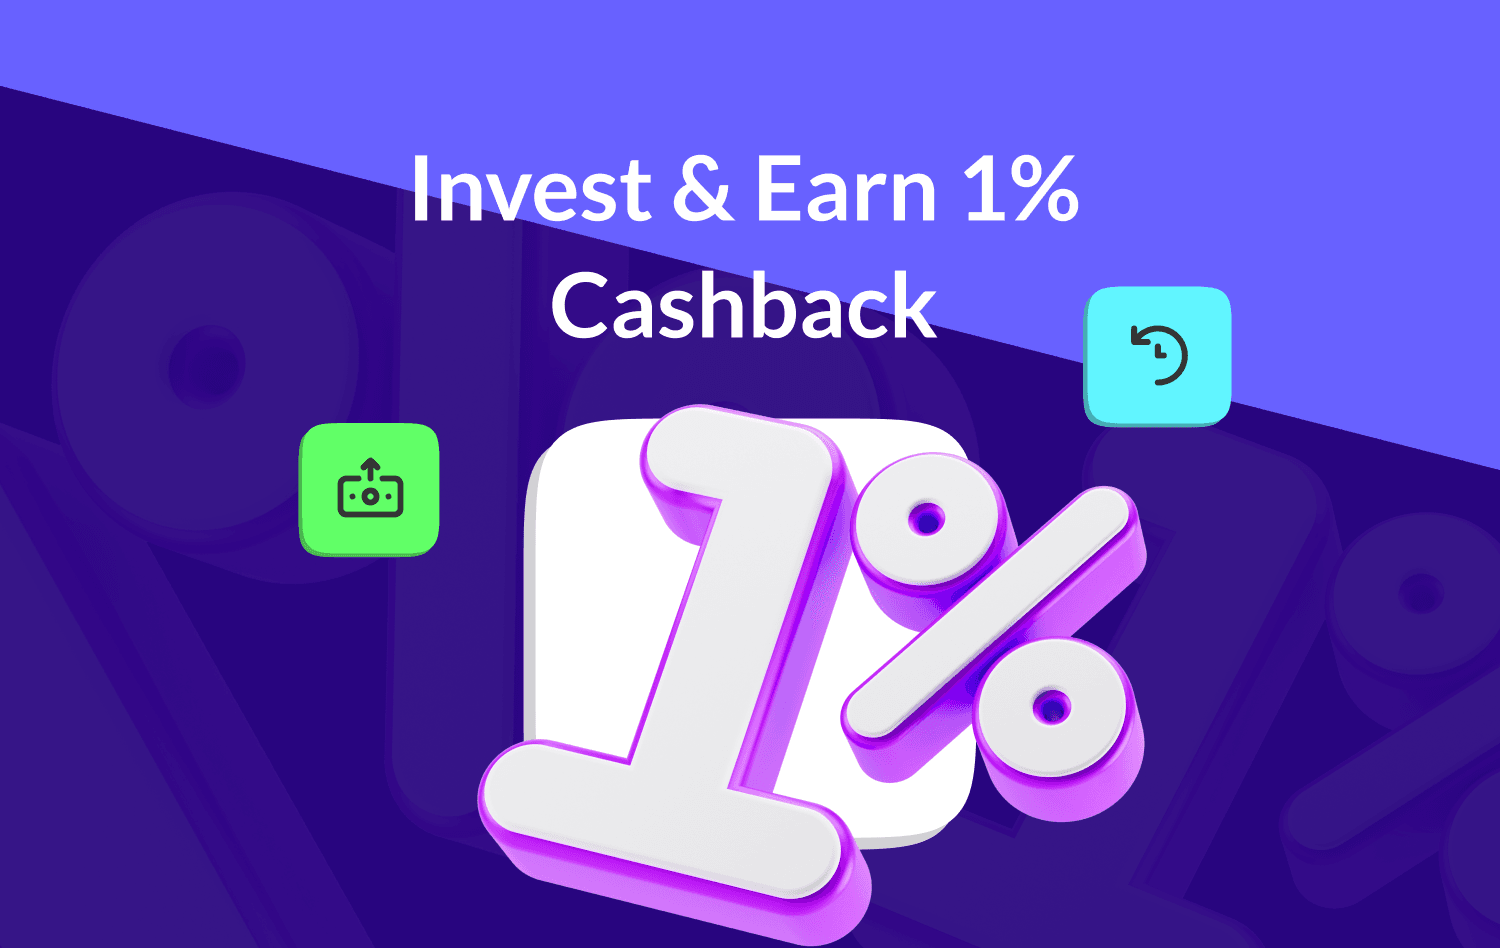 Maximize Your Earnings with Loanch's Exclusive Cashback Offer!